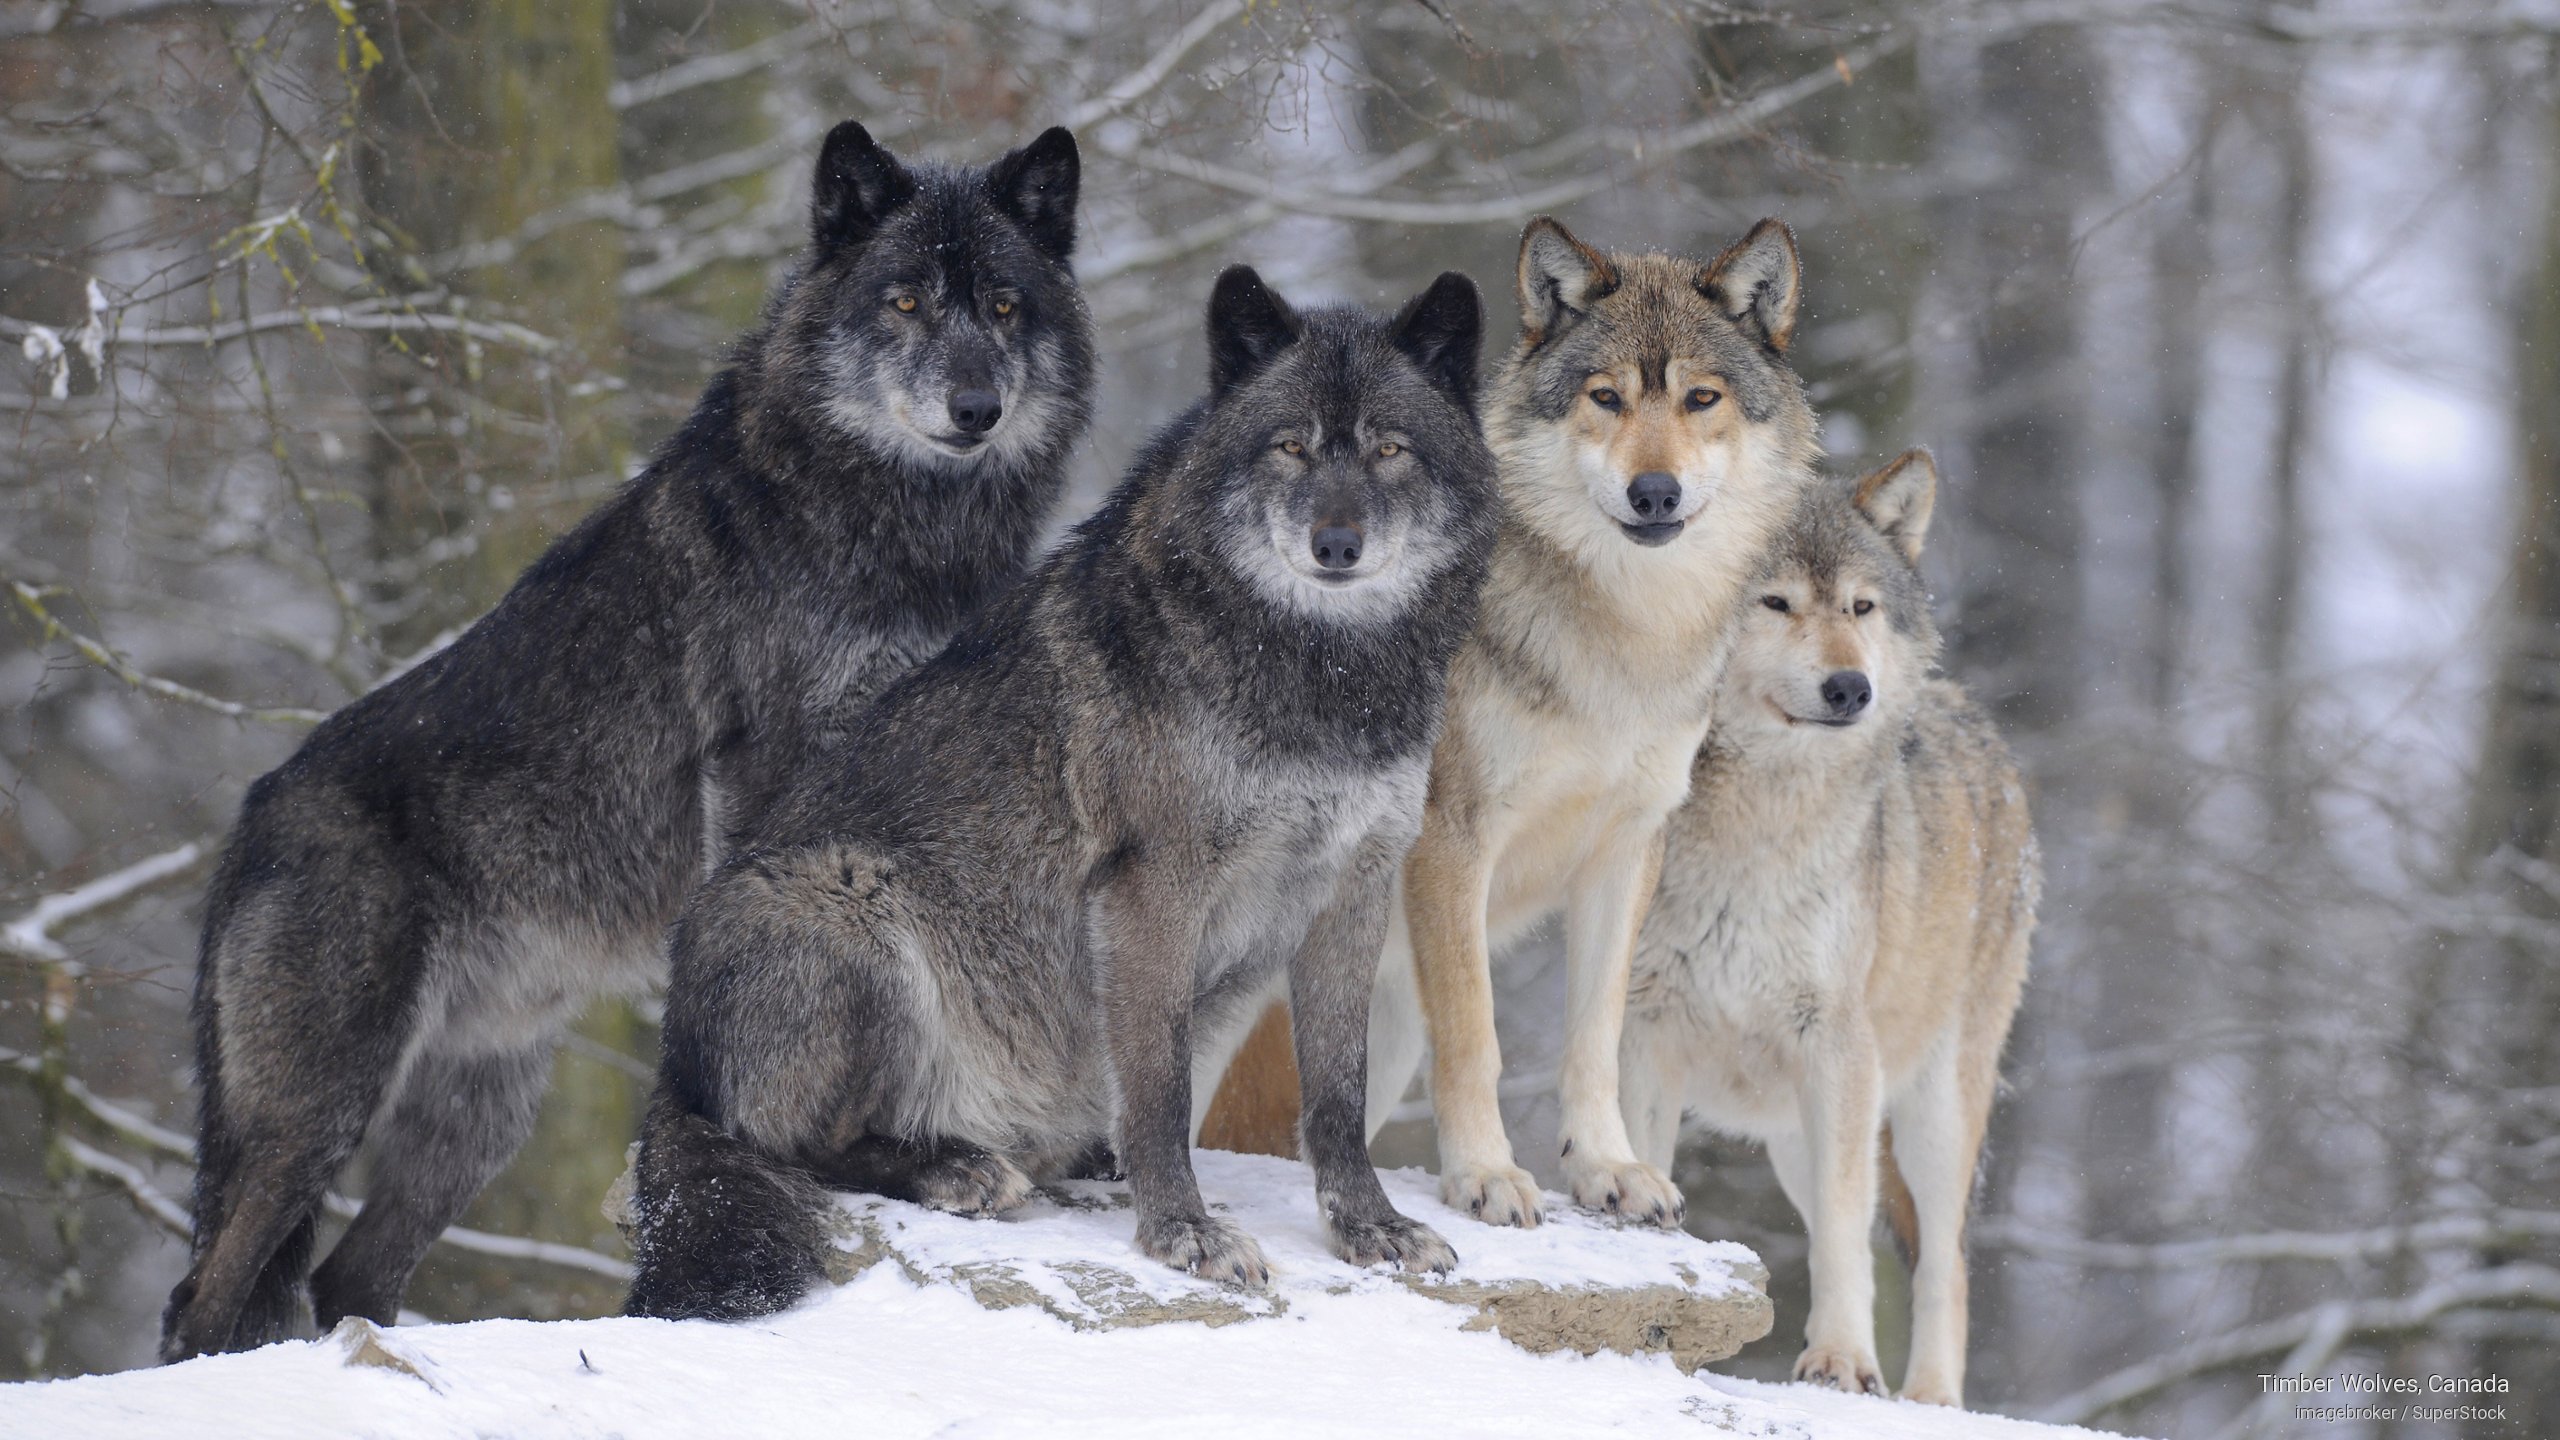 Timber Wolves Canada